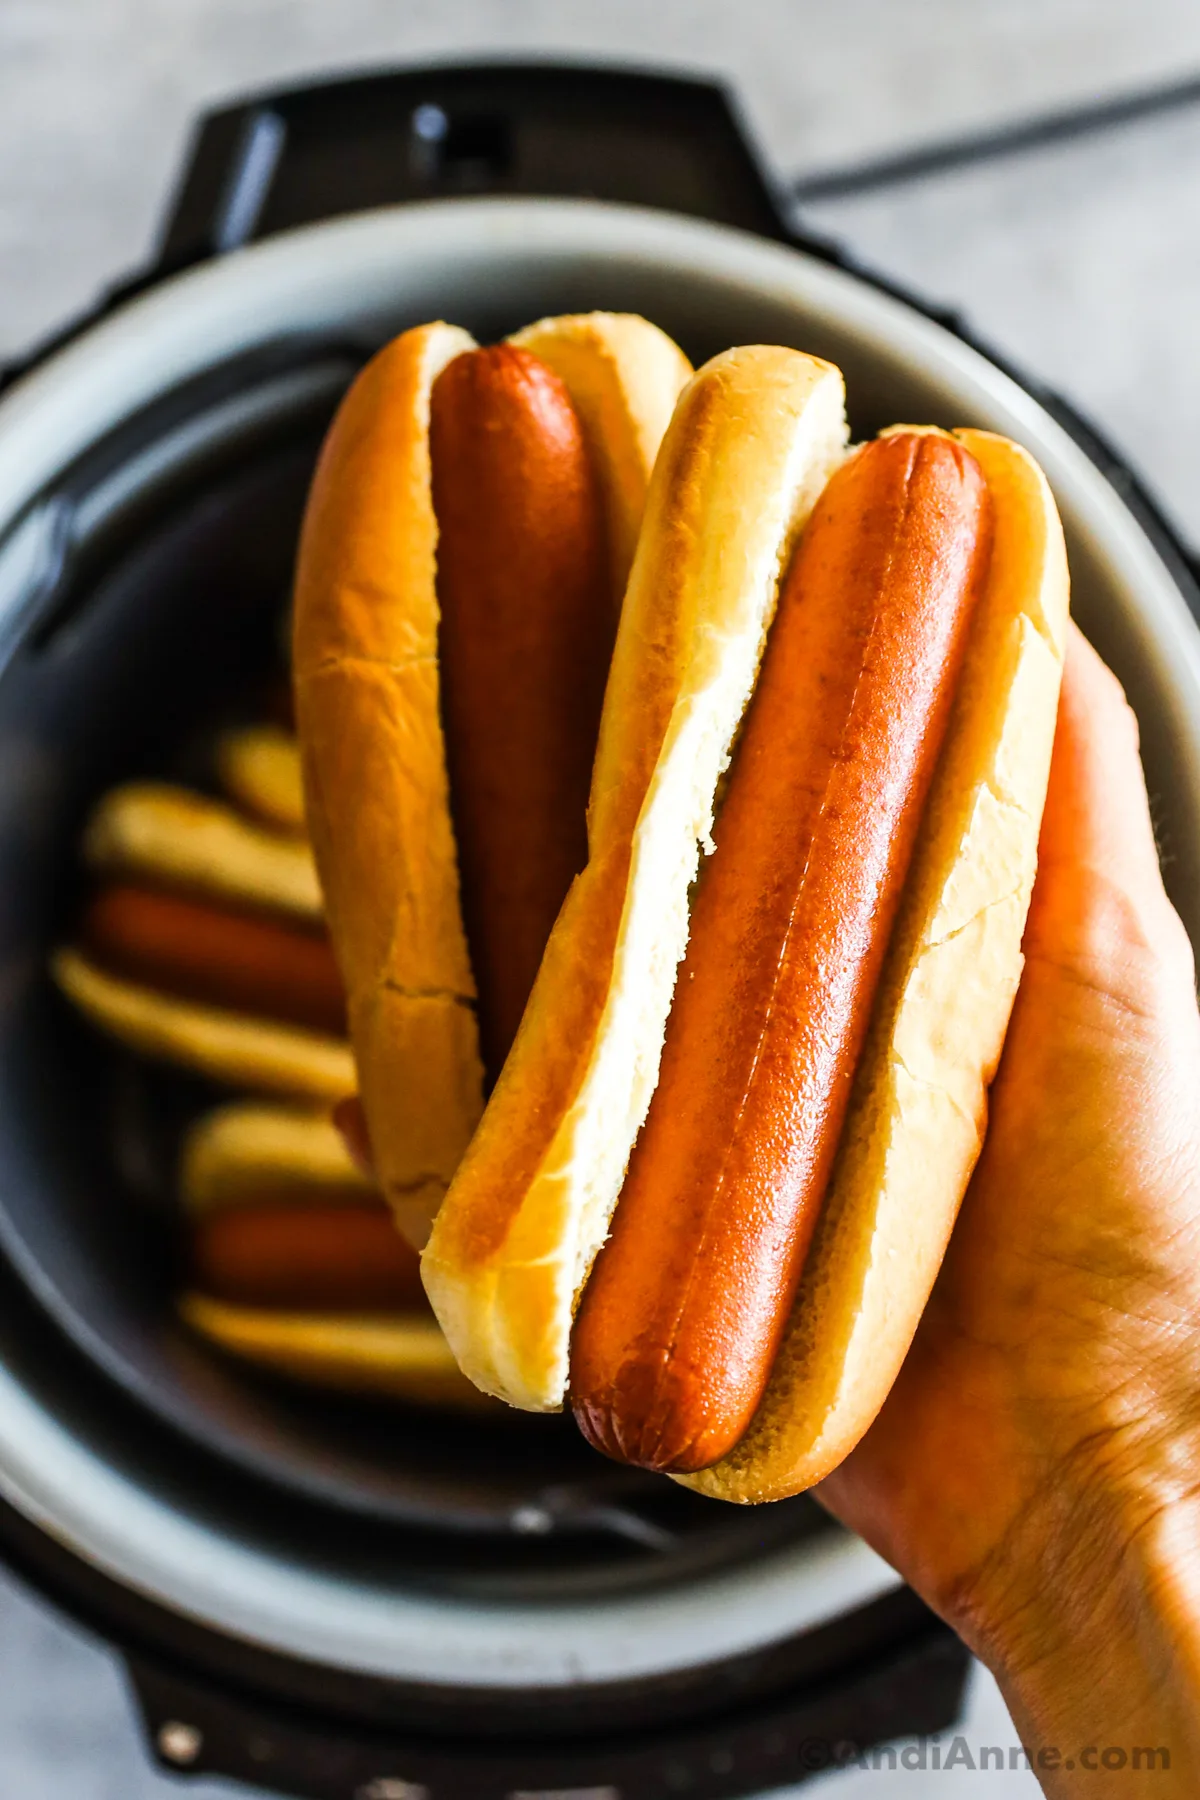 A hand holding two hot dogs with buns above an air fryer.